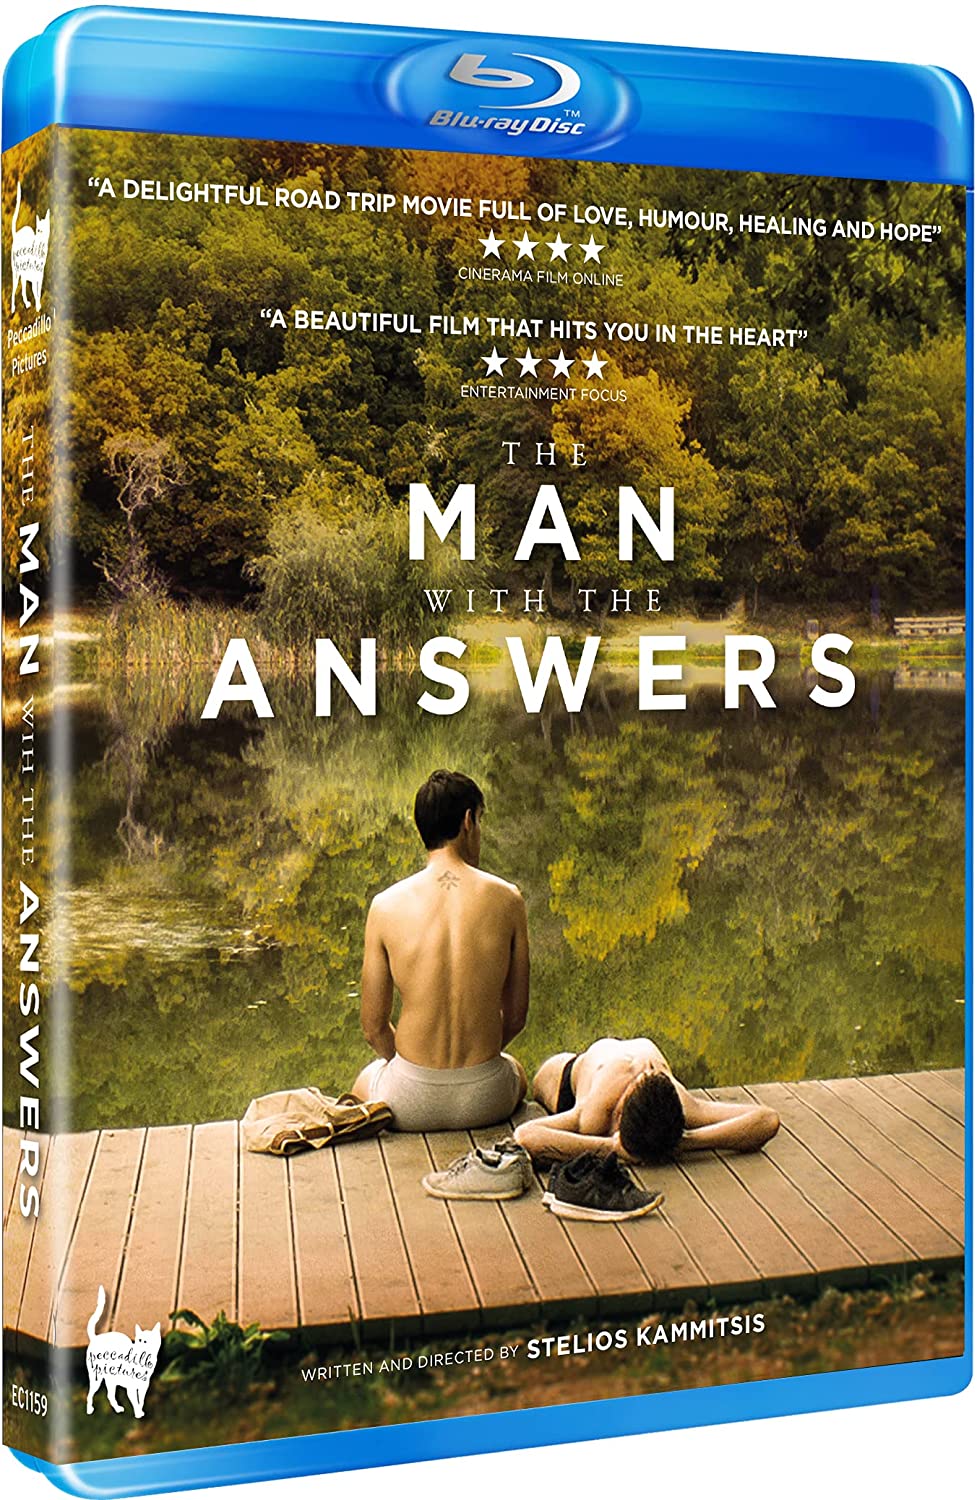 The Man with the Answers [Blu-ray]